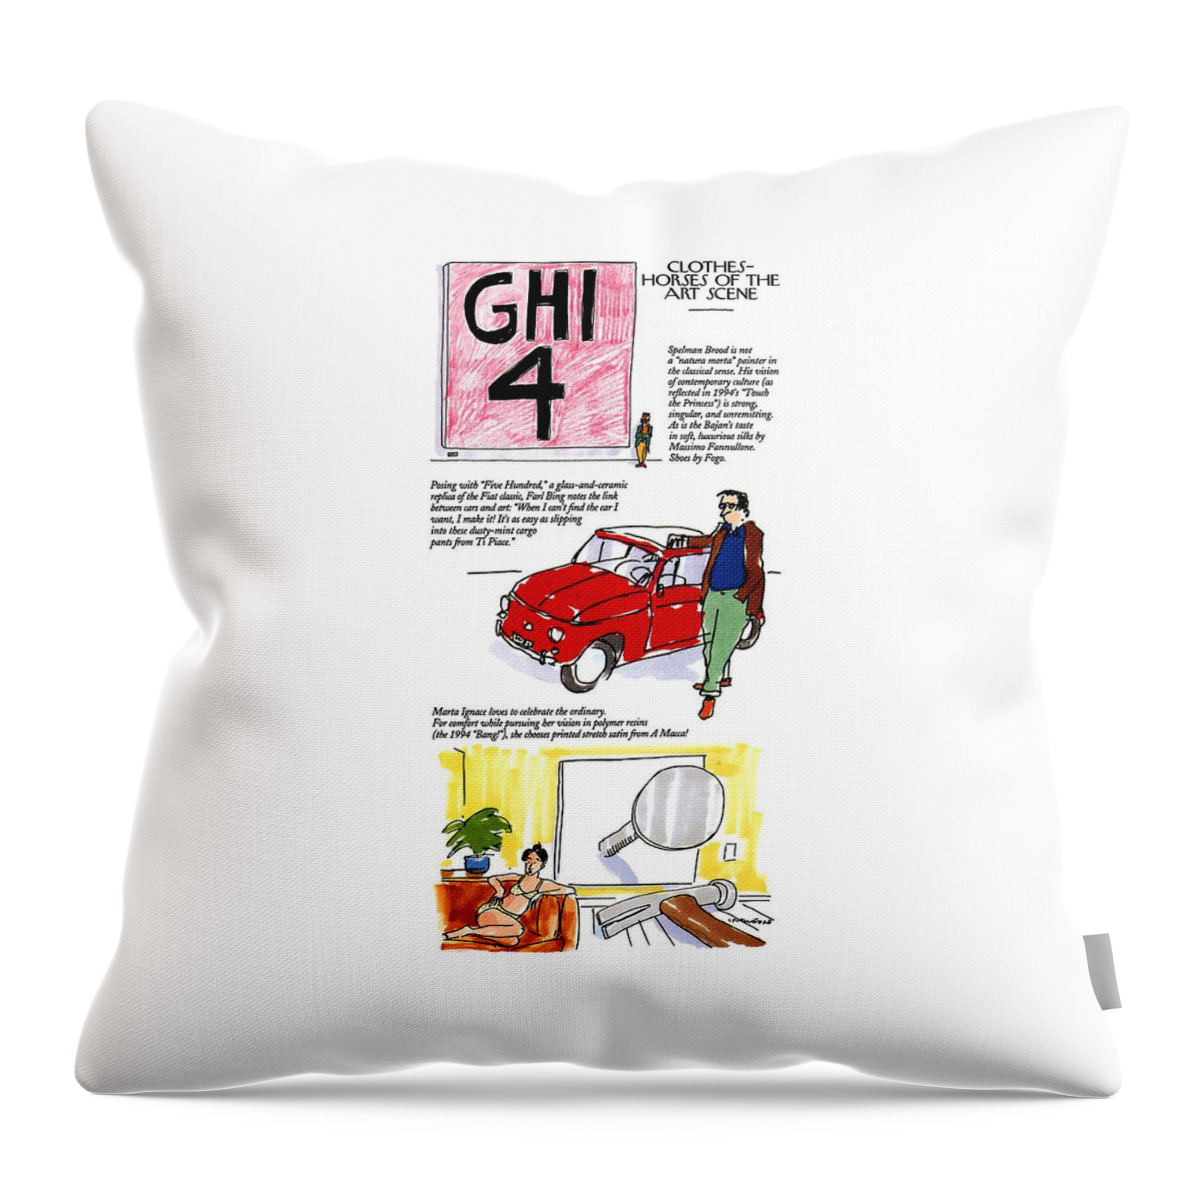 Clothes-horses Of The Art Scene Throw Pillow